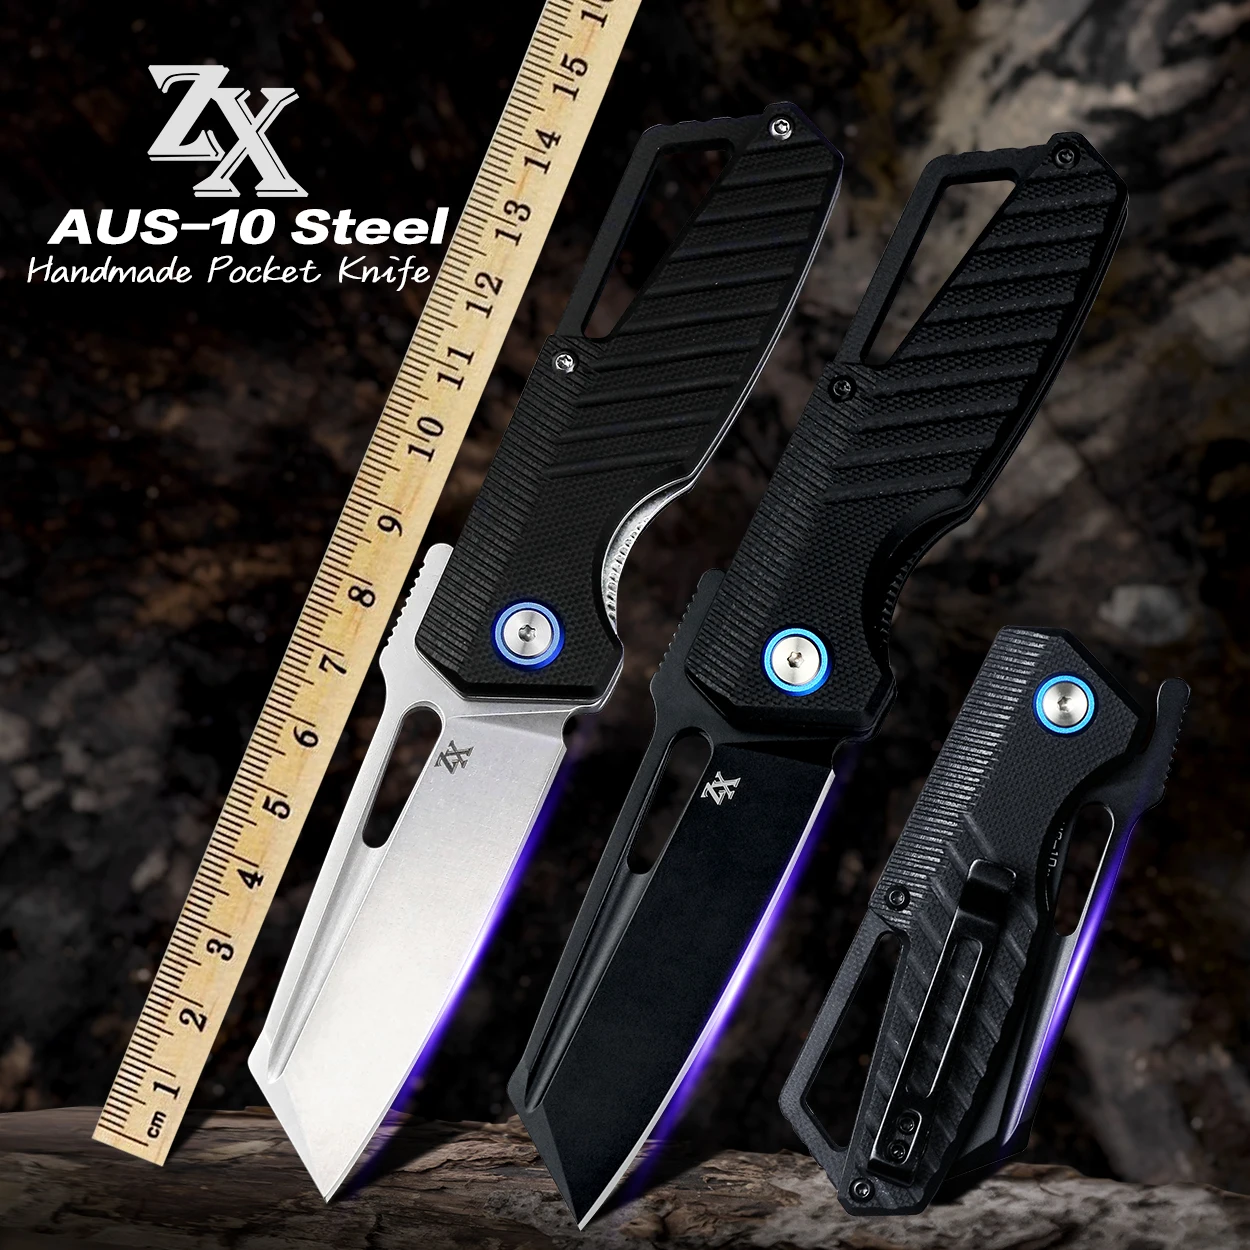 Zx Pocket Knife, Folding Knife With Ball Bearing High Hardness Aus-10  Steel, Knife For Camping, Hiking, Hunting, Fishing, Edc - Knife - AliExpress